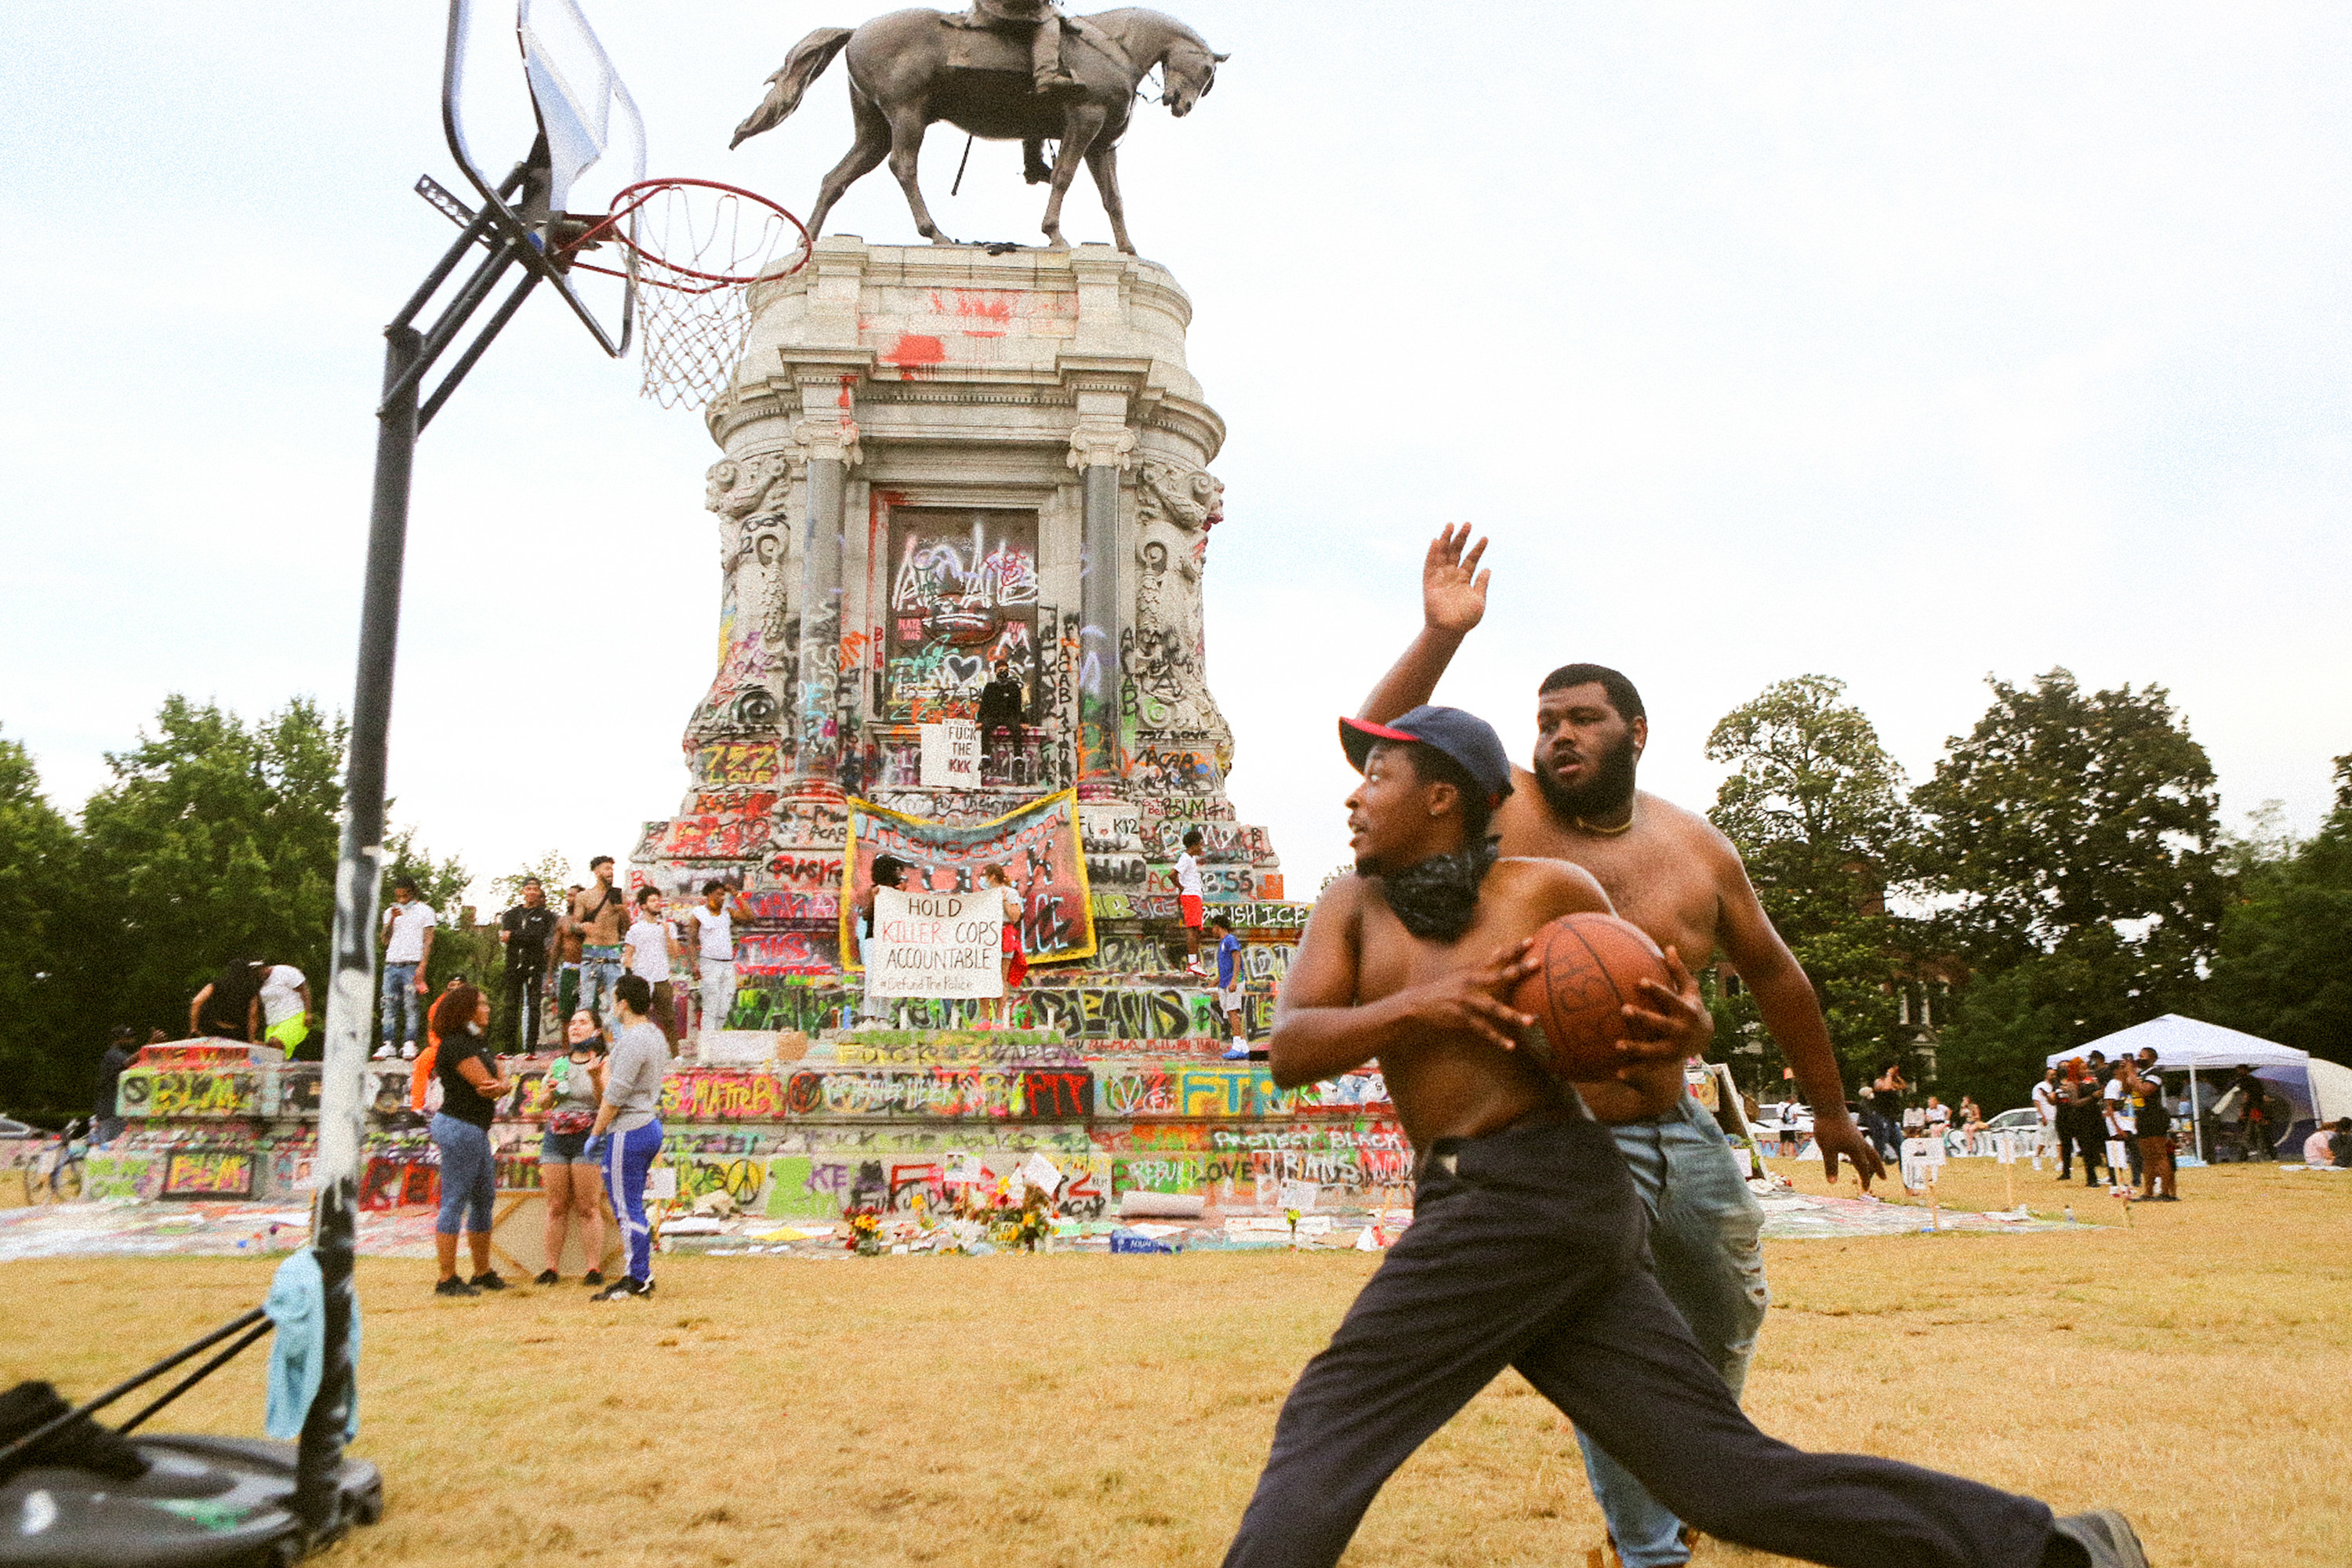 Two men play basketball in the foreground, in the background is a confederate monument covered in graffiti 